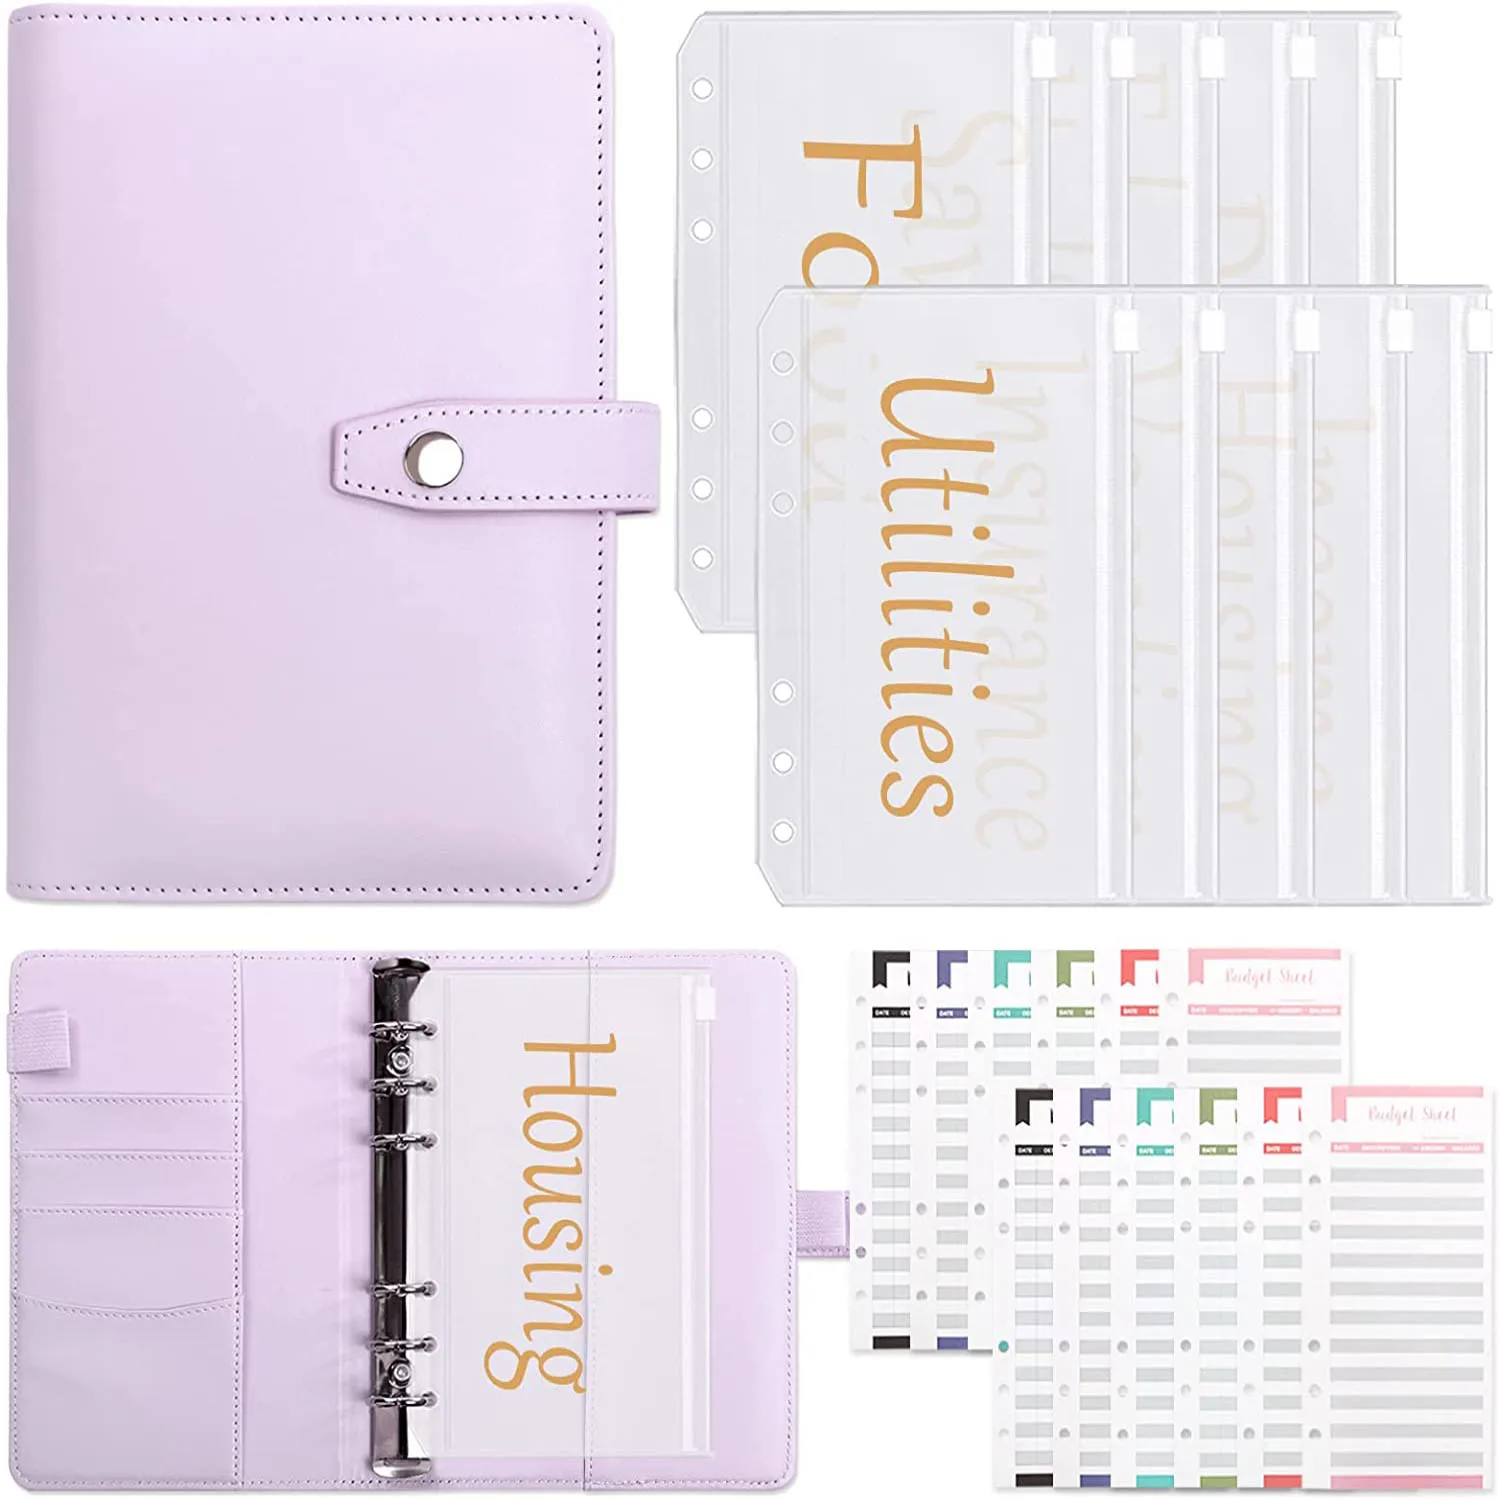 A6 Budget Binder with 10pcs Pre-printed Cash Envelopes for Budgeting,12 Expense Budget Sheets,Planner Organizer for Saving Money